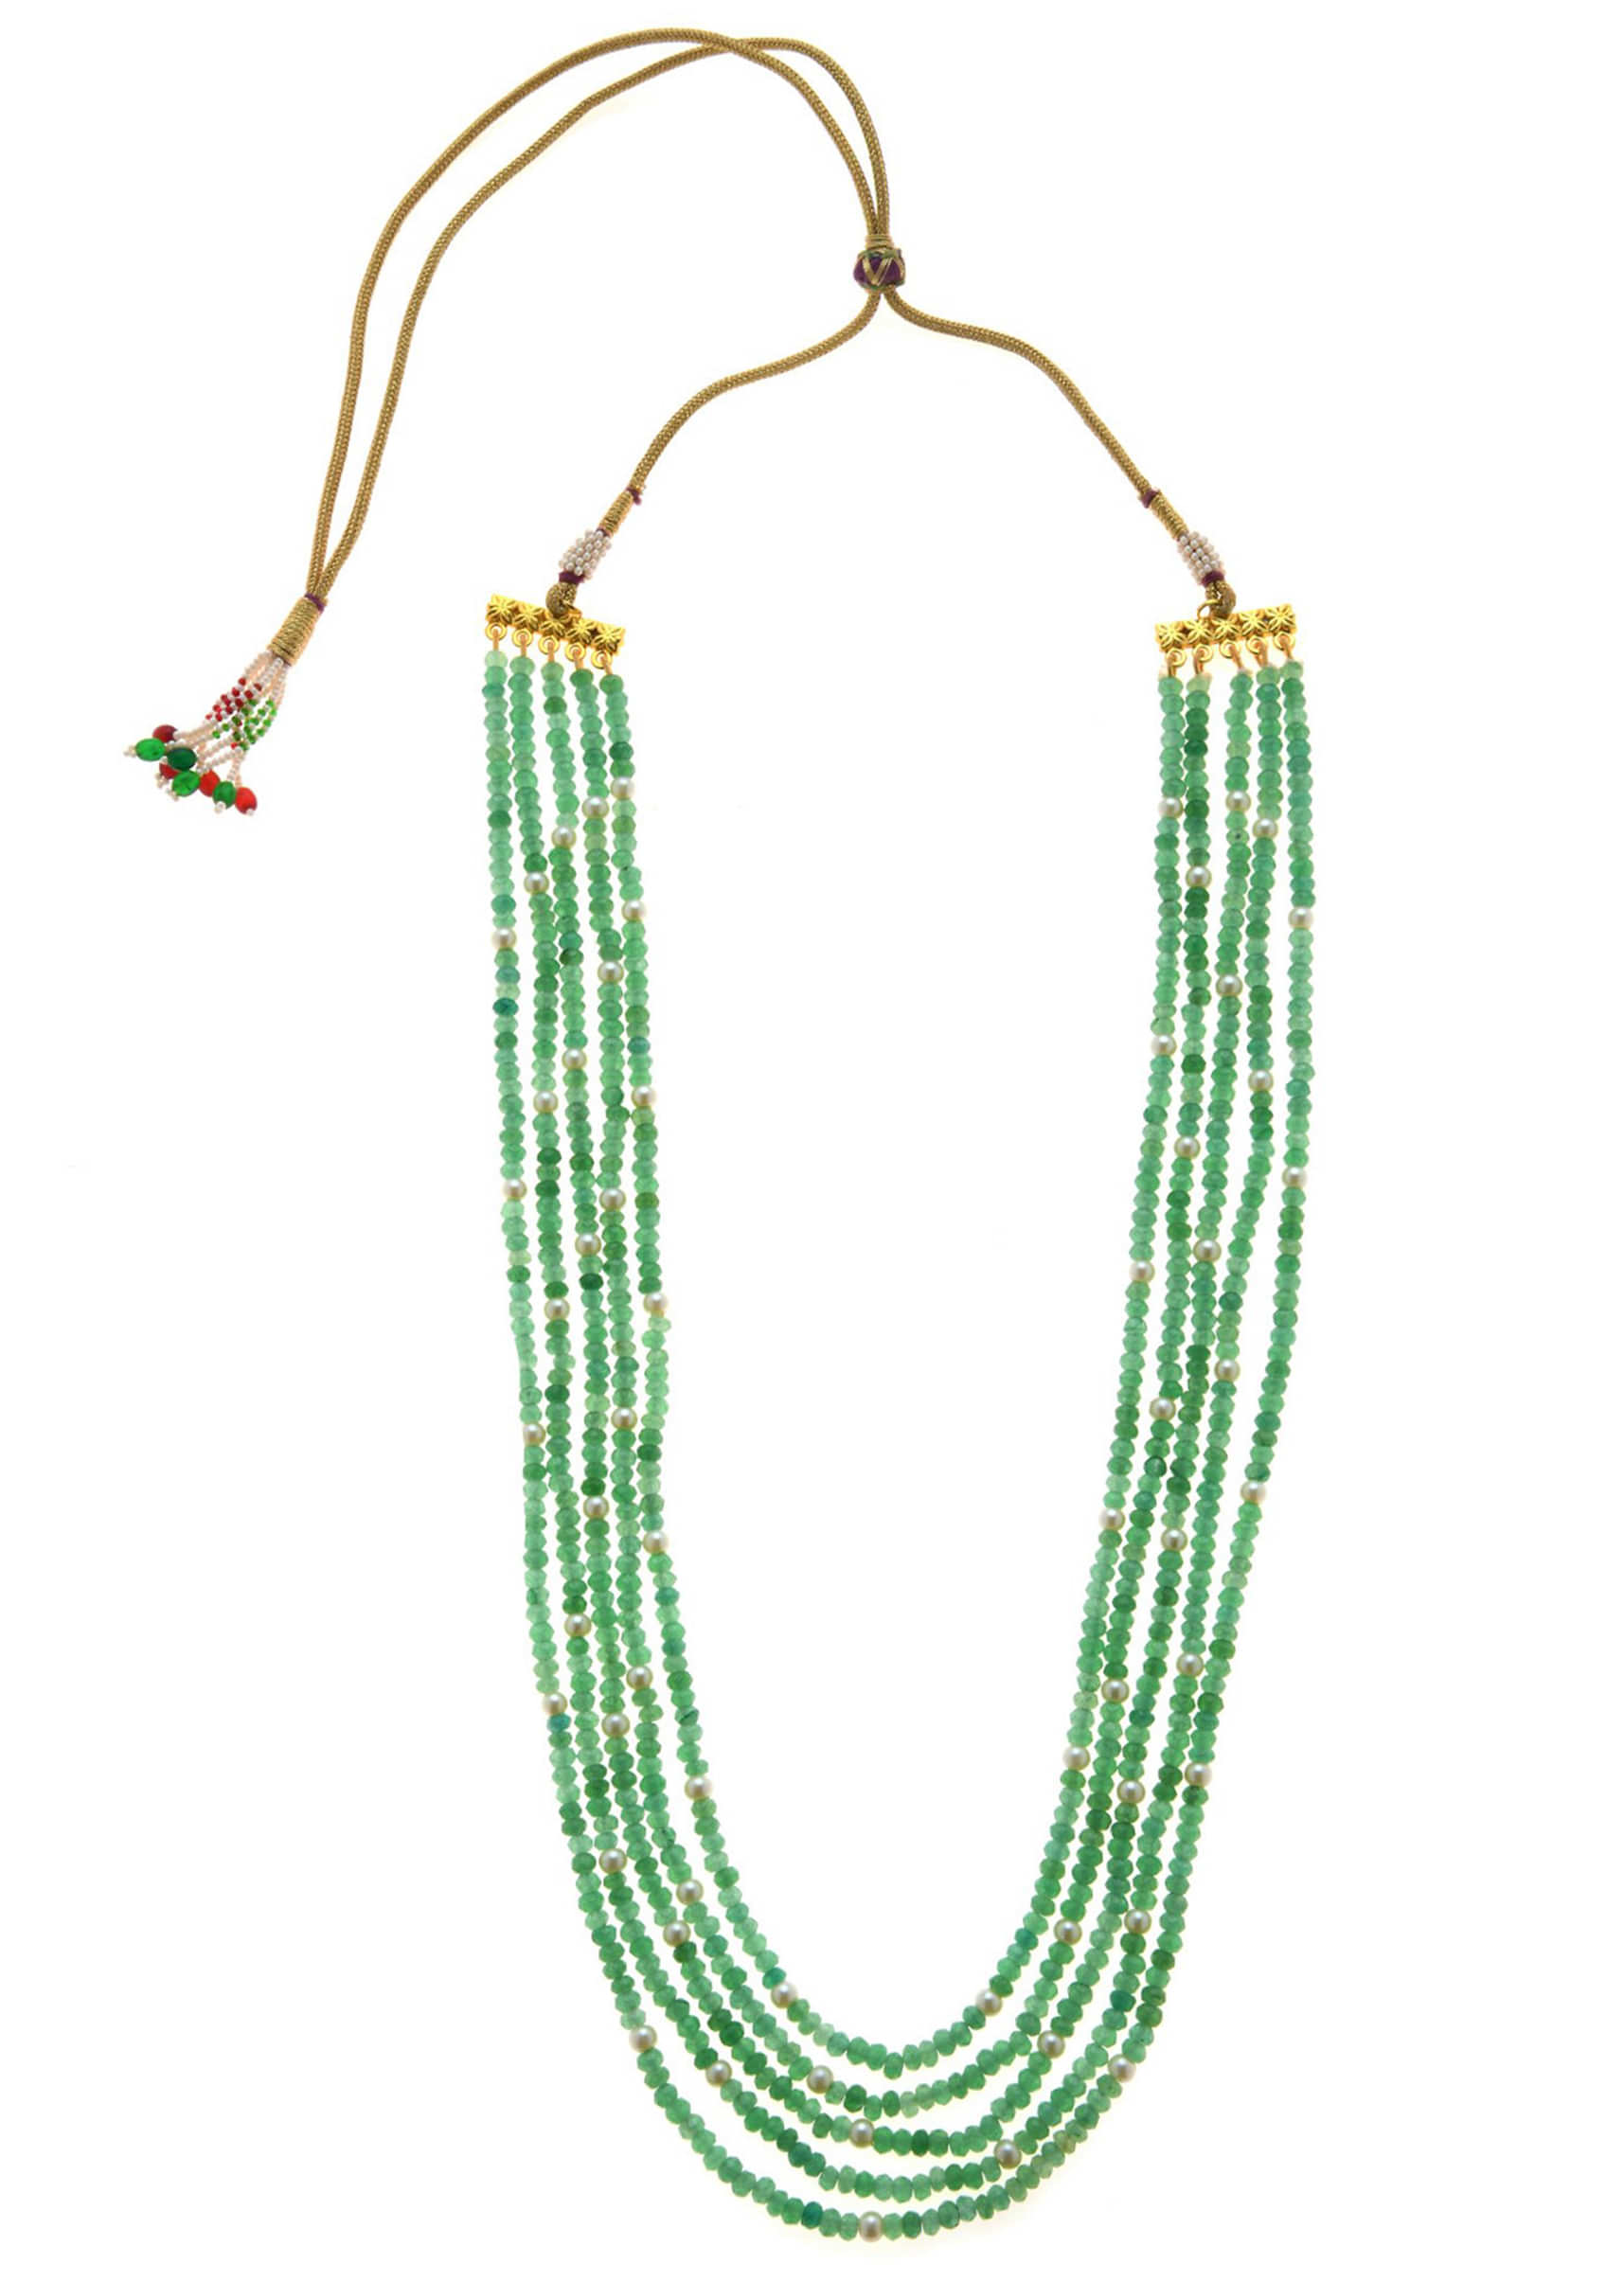 Green Necklace With Multiple Bead Strings And White Stone Accents